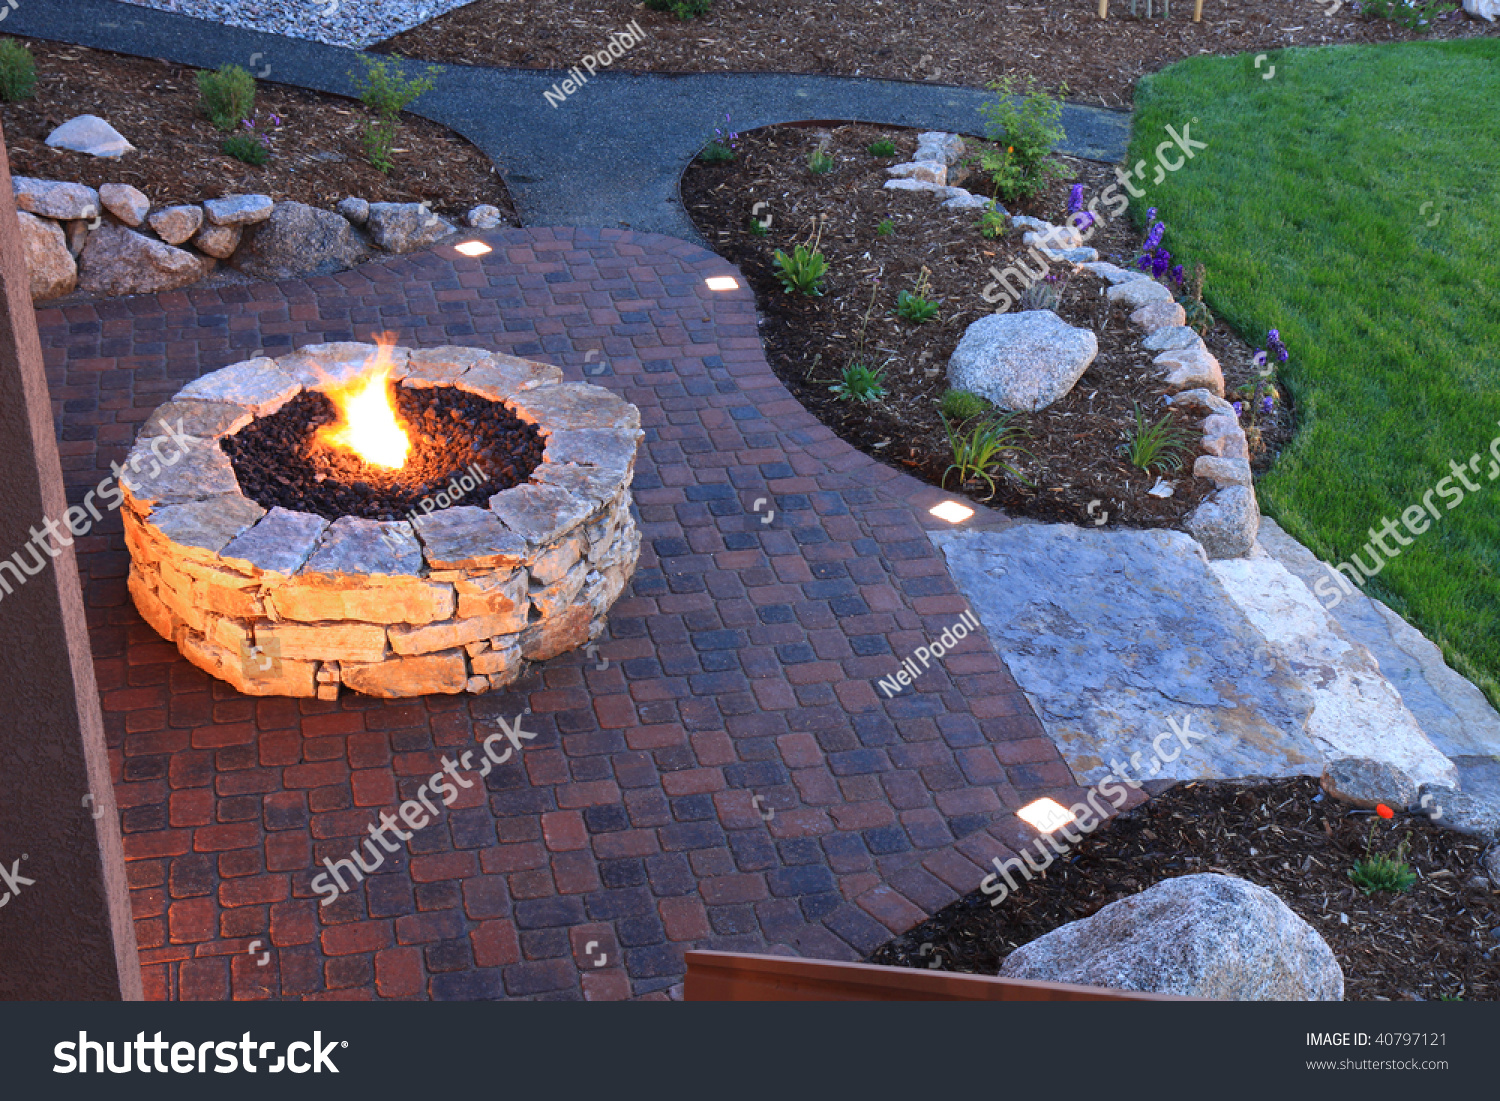 Awesome Backyard With Fire Pit And Illuminated Paver Patio ...